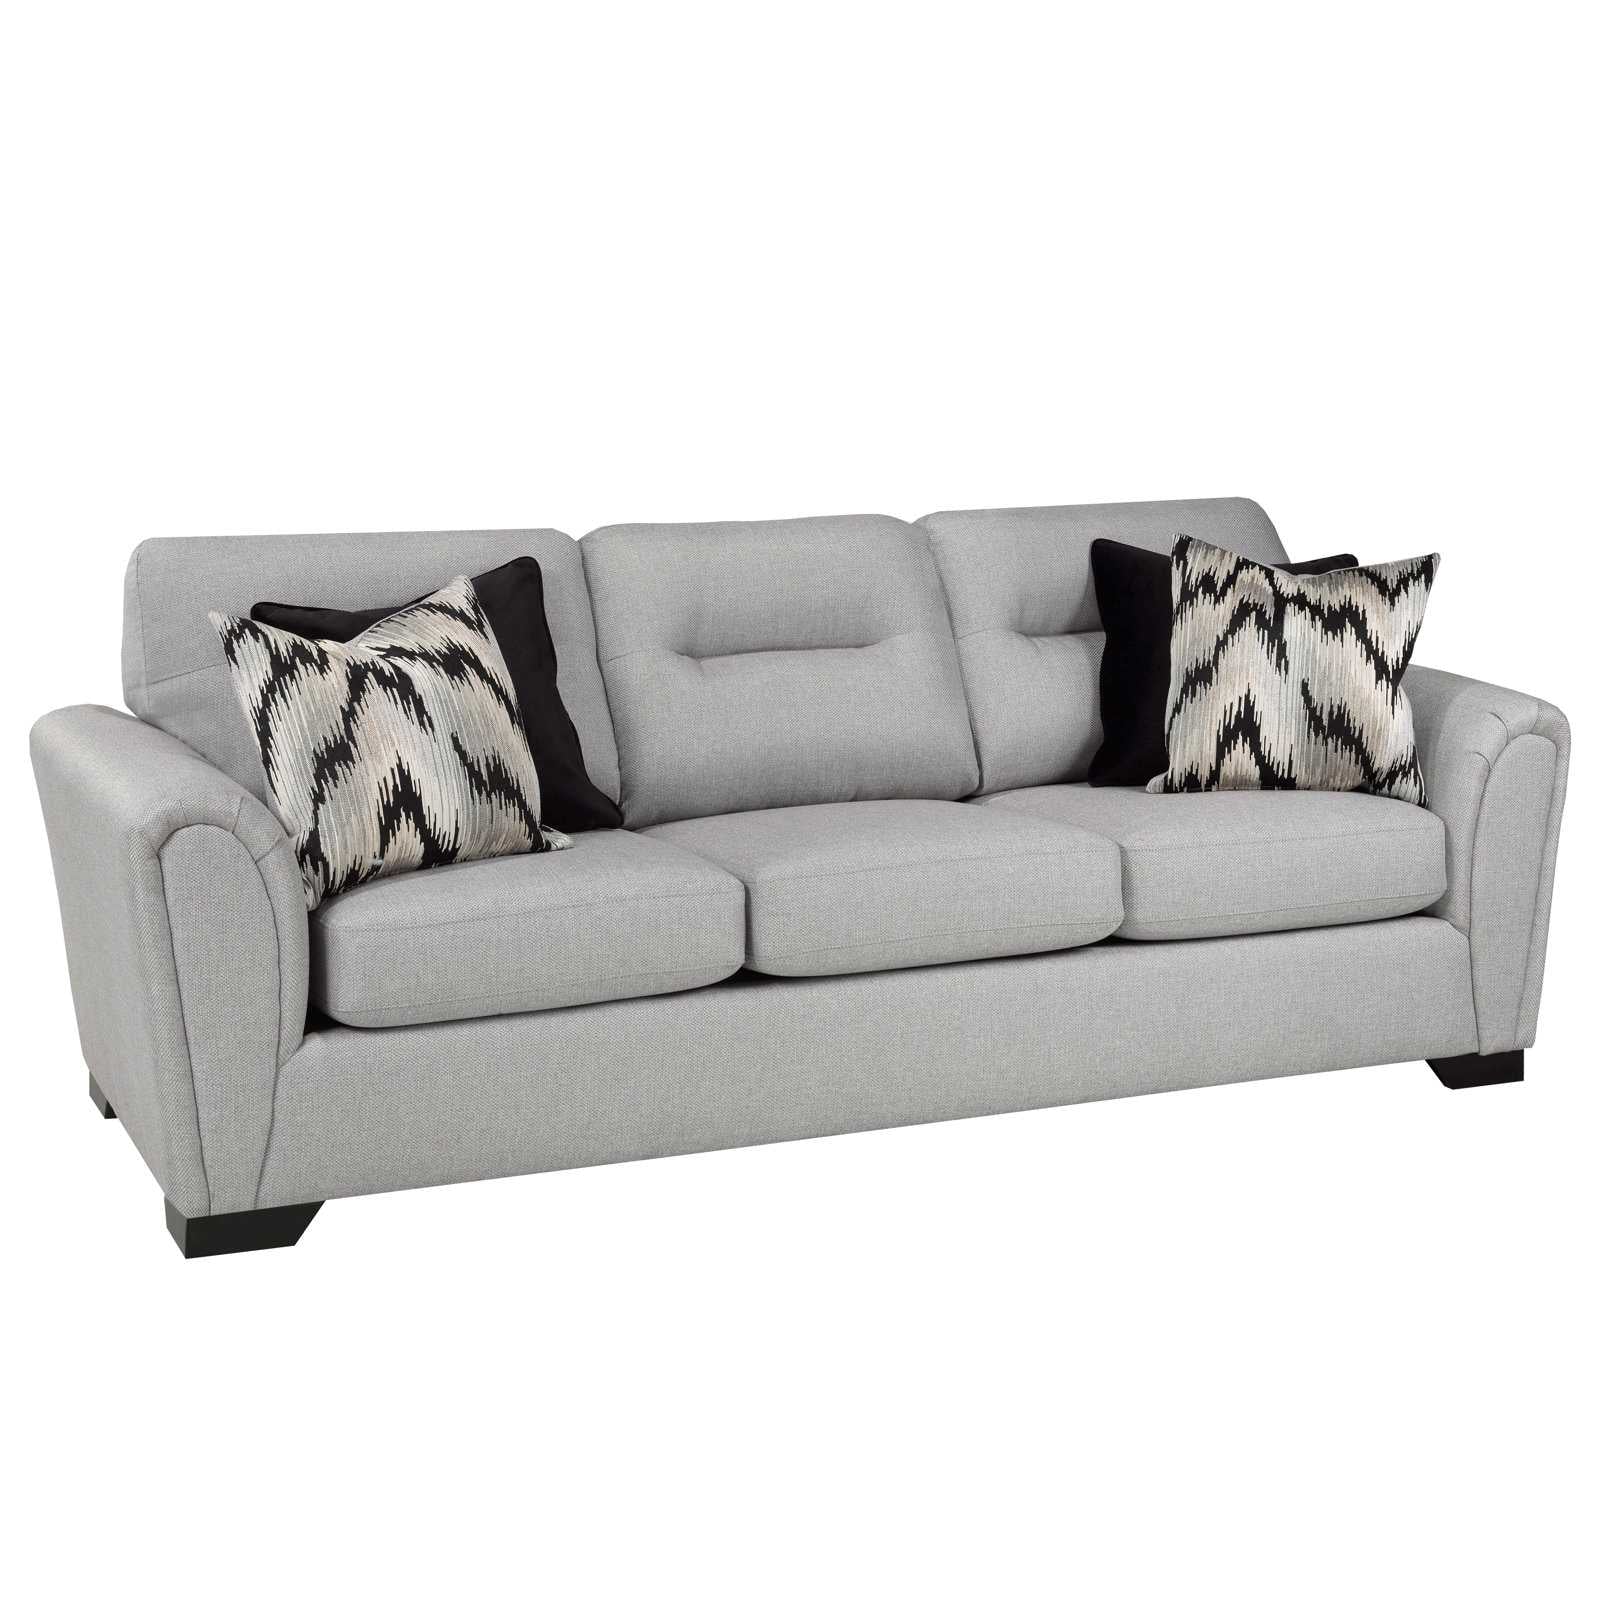 Canadian Made Zesus Silver Sofa Collection 9559